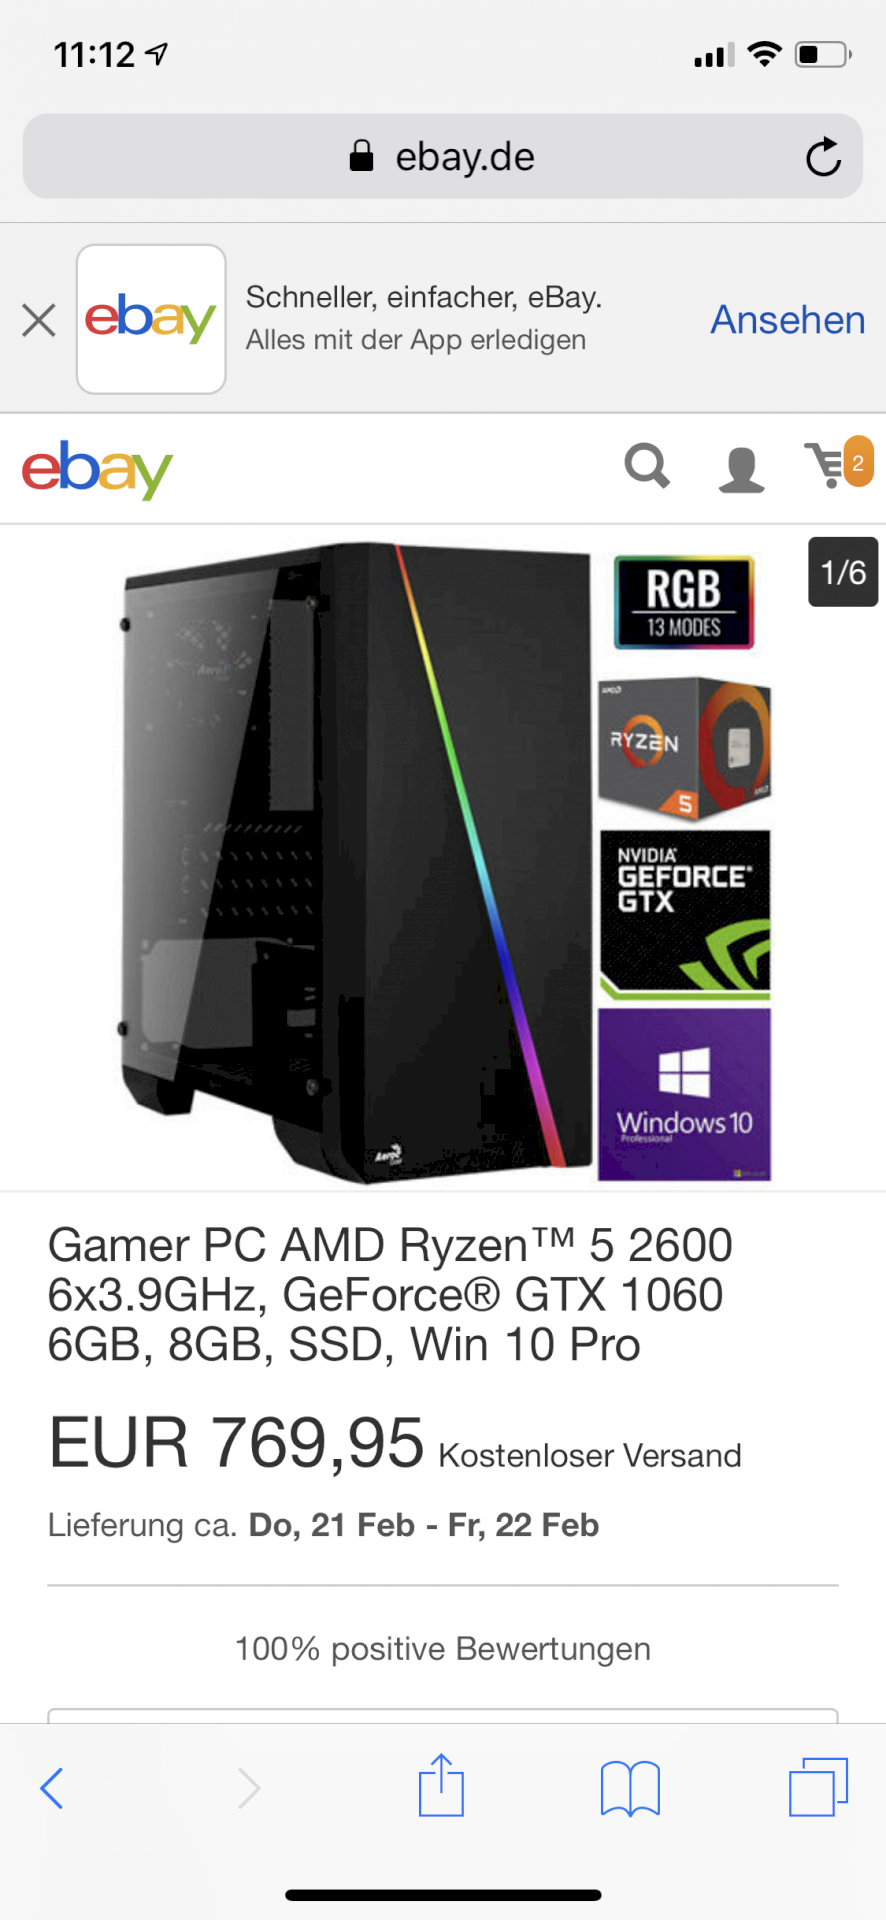 Which of these 3 gaming PCs would you buy - 1